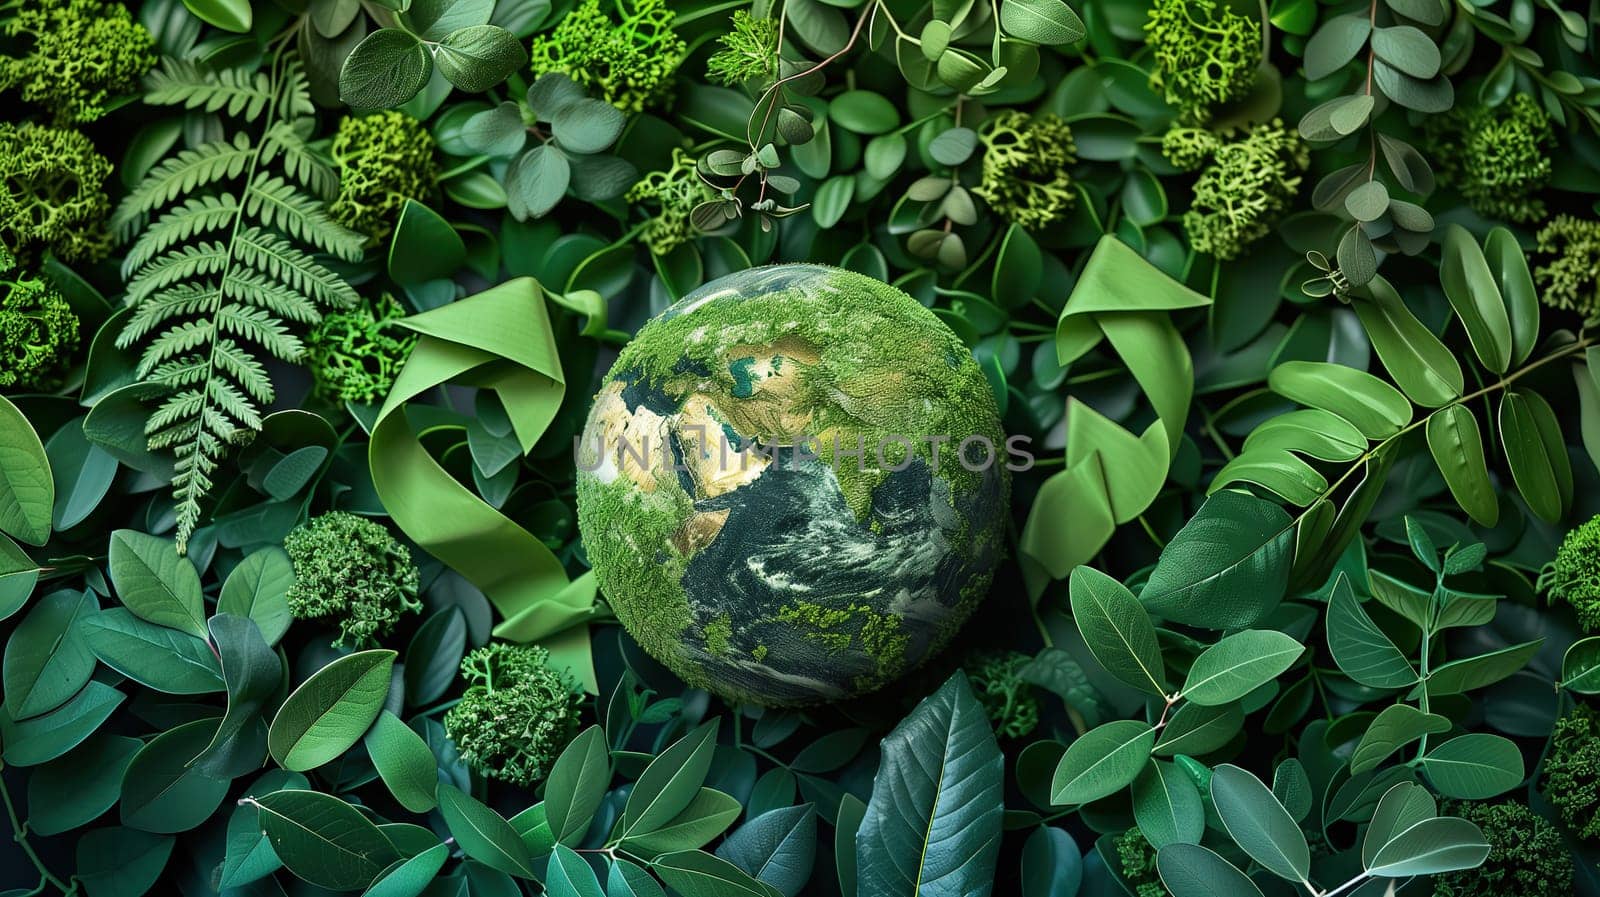 The image shows a lush green earth encircled by a variety of leaves and plants, symbolizing vitality and the importance of nature. The earth is prominently displayed at the center, enveloped by a vibrant display of greenery.